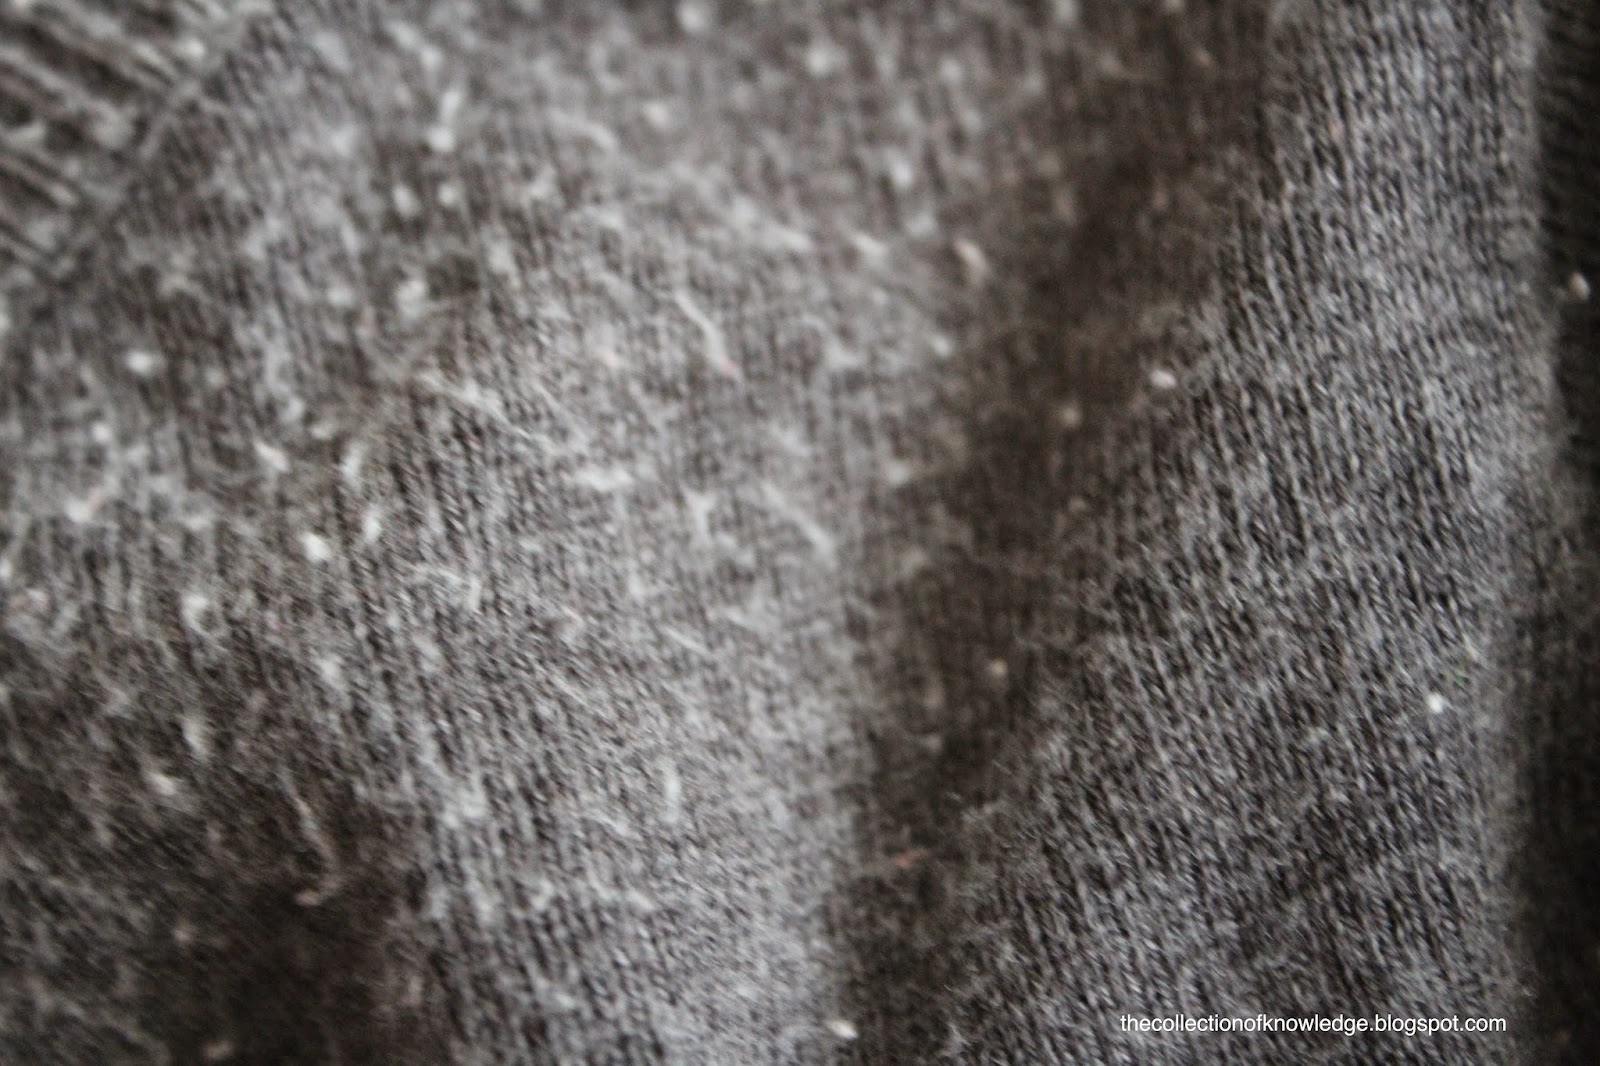 The Collection of Knowledge : Removing Lint From Sweaters